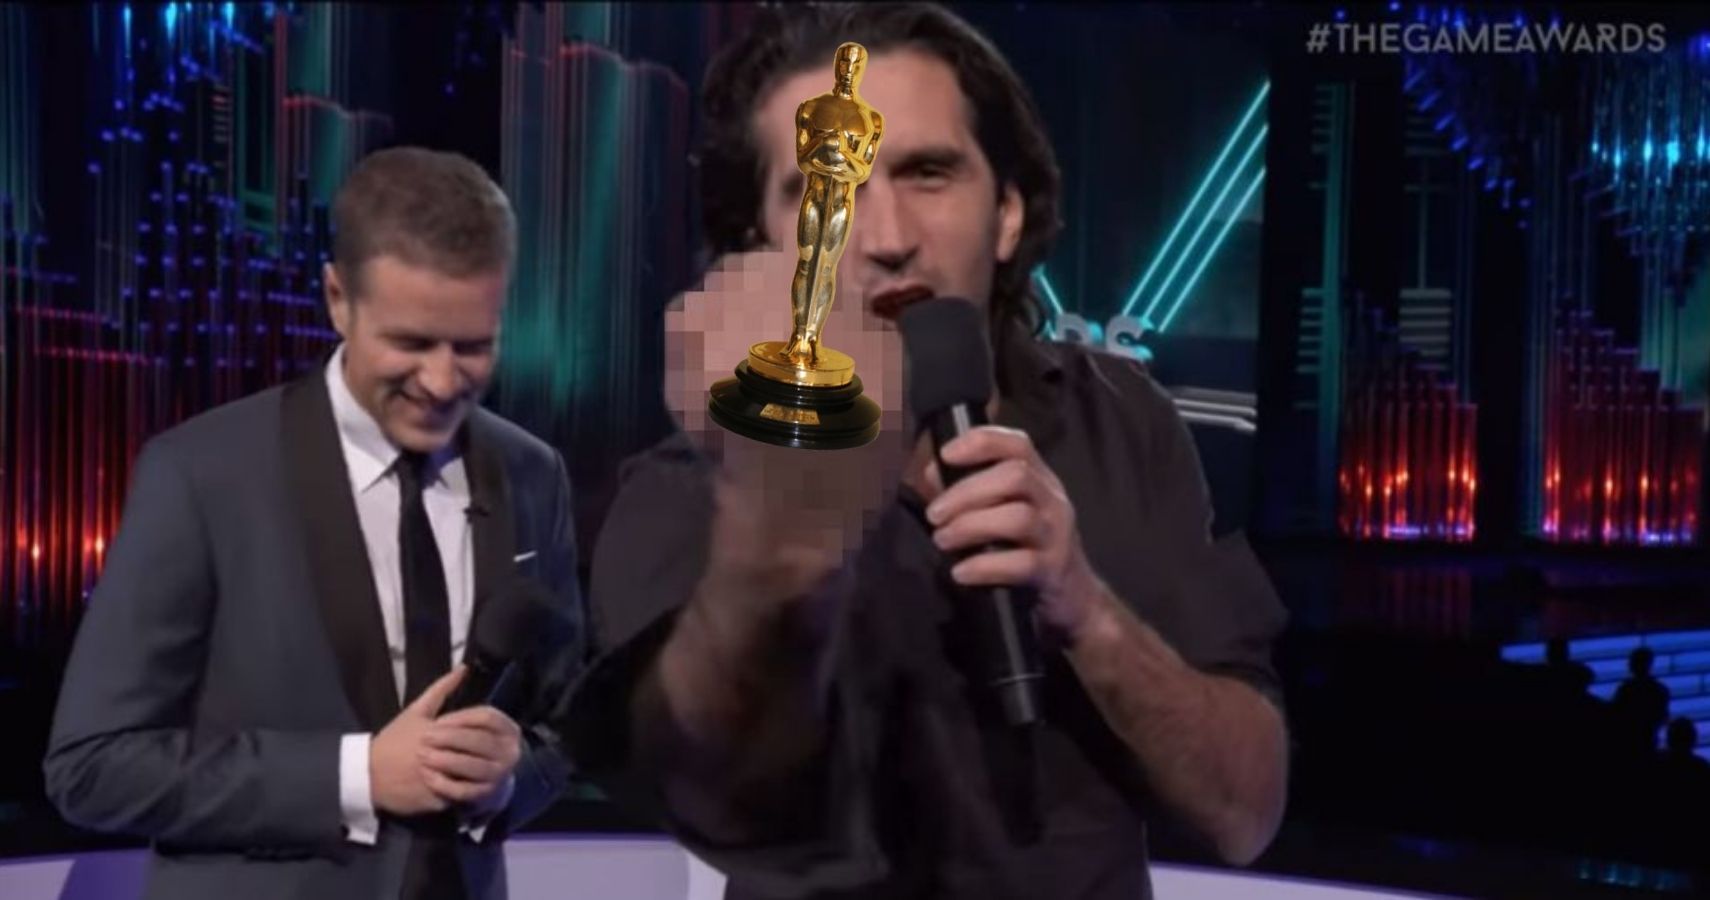 Josef Fares' middle finger blurred out by an Oscar